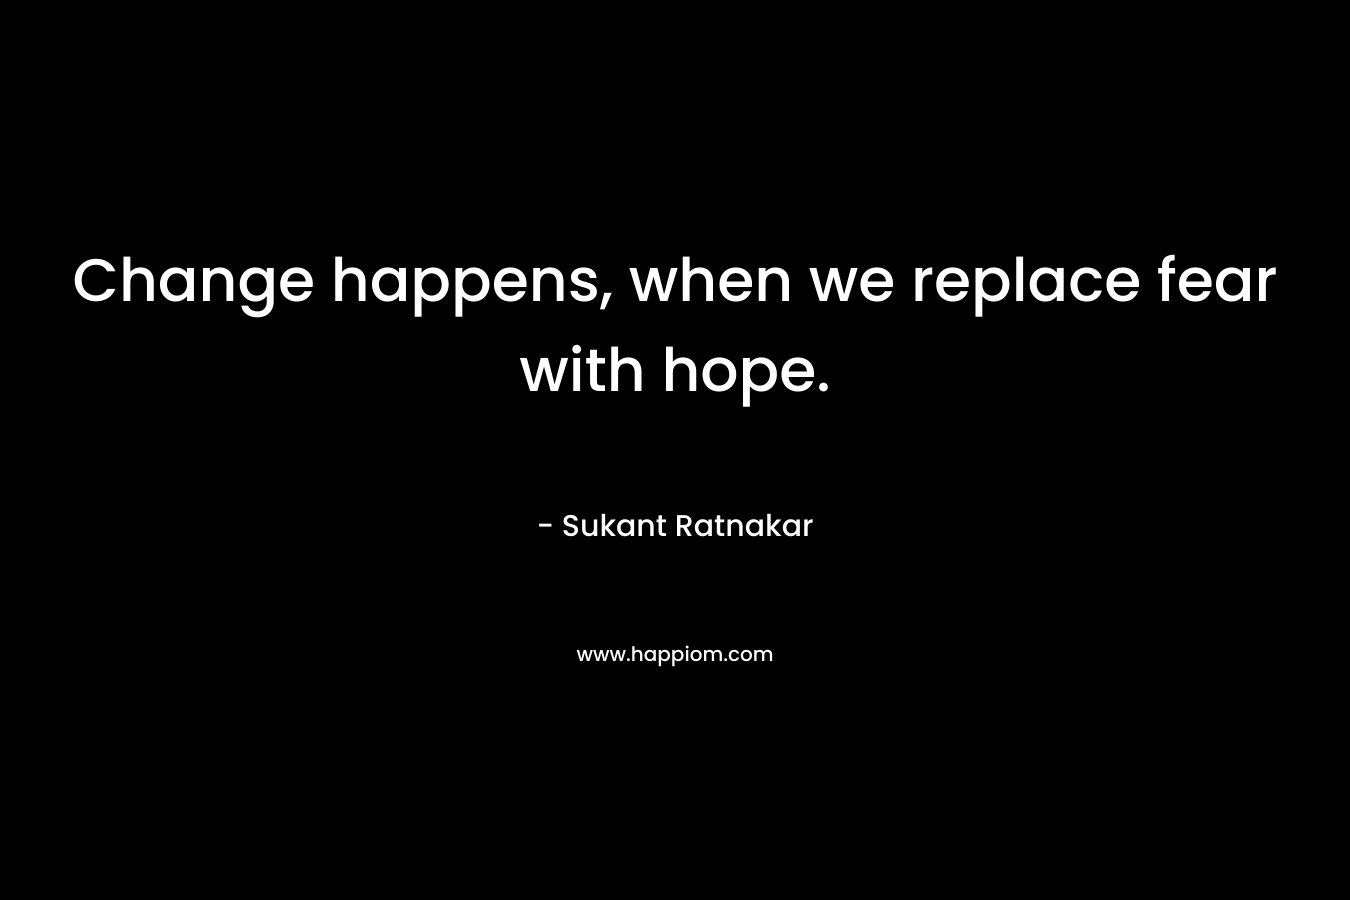 Change happens, when we replace fear with hope.